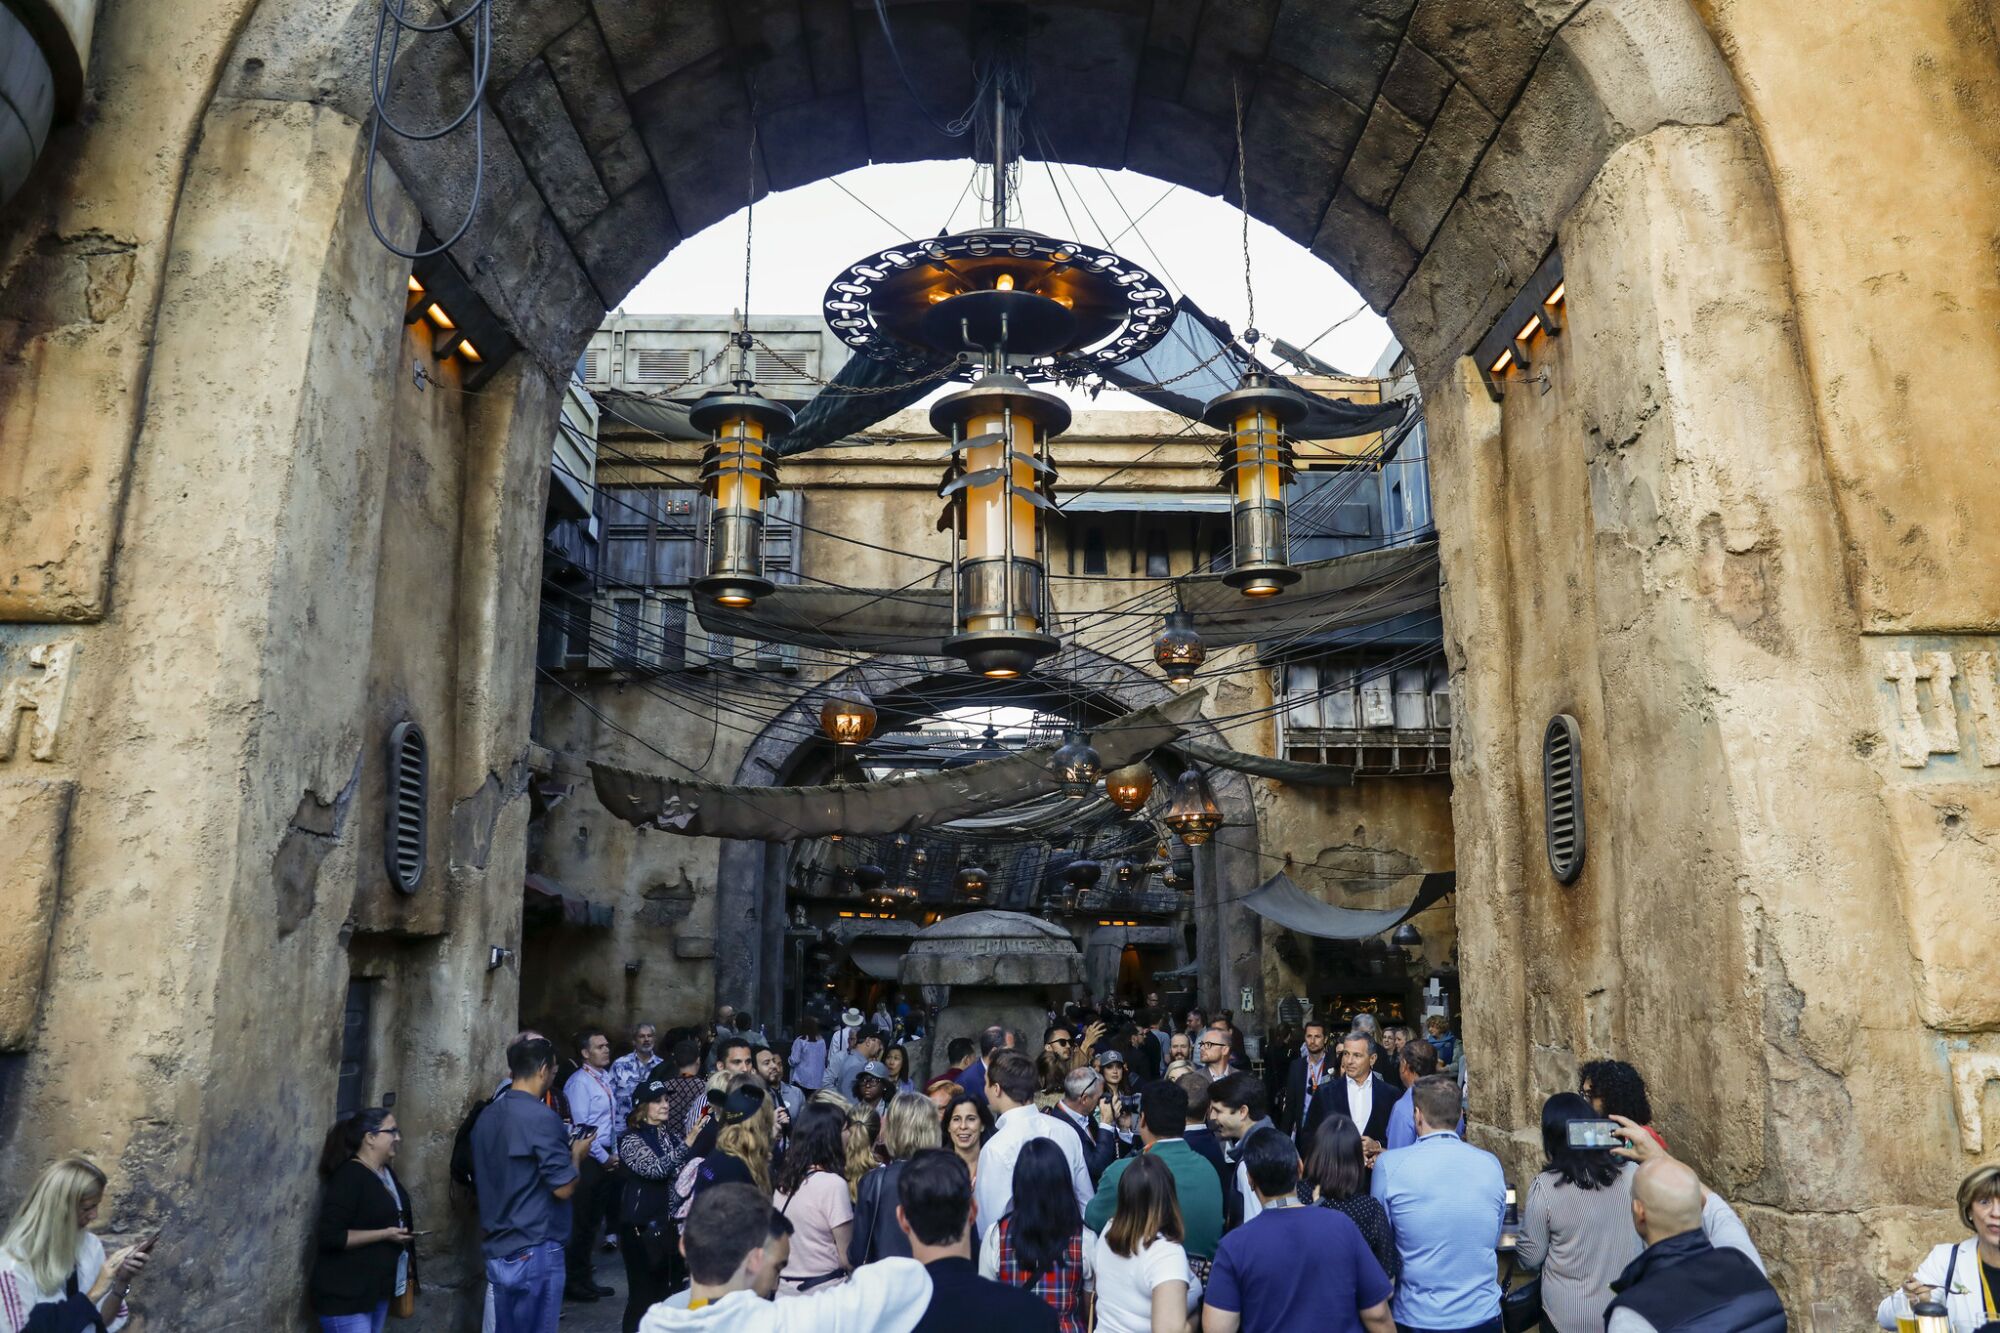 Disneyland last year opened Galaxy's Edge, a 14-acre expansion themed to "Star Wars." 